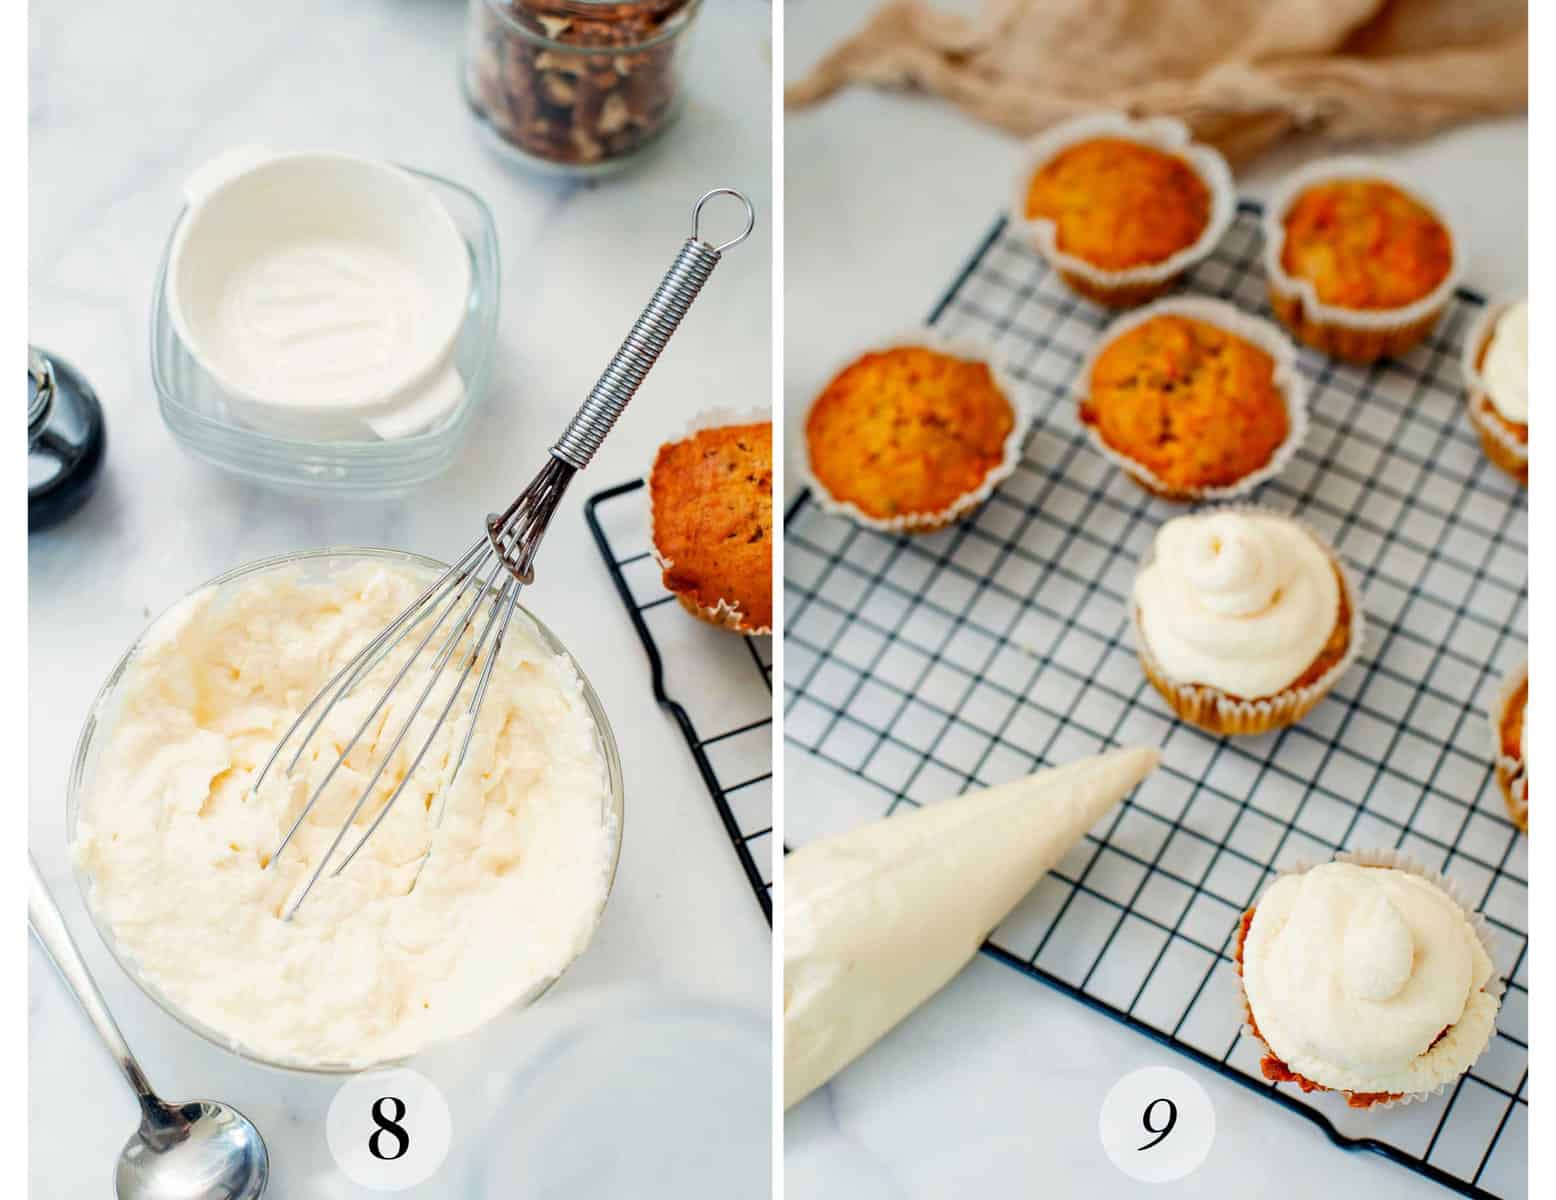 Two images showing the preparation of cream cheese frosting and frosting carrot cupcakes.